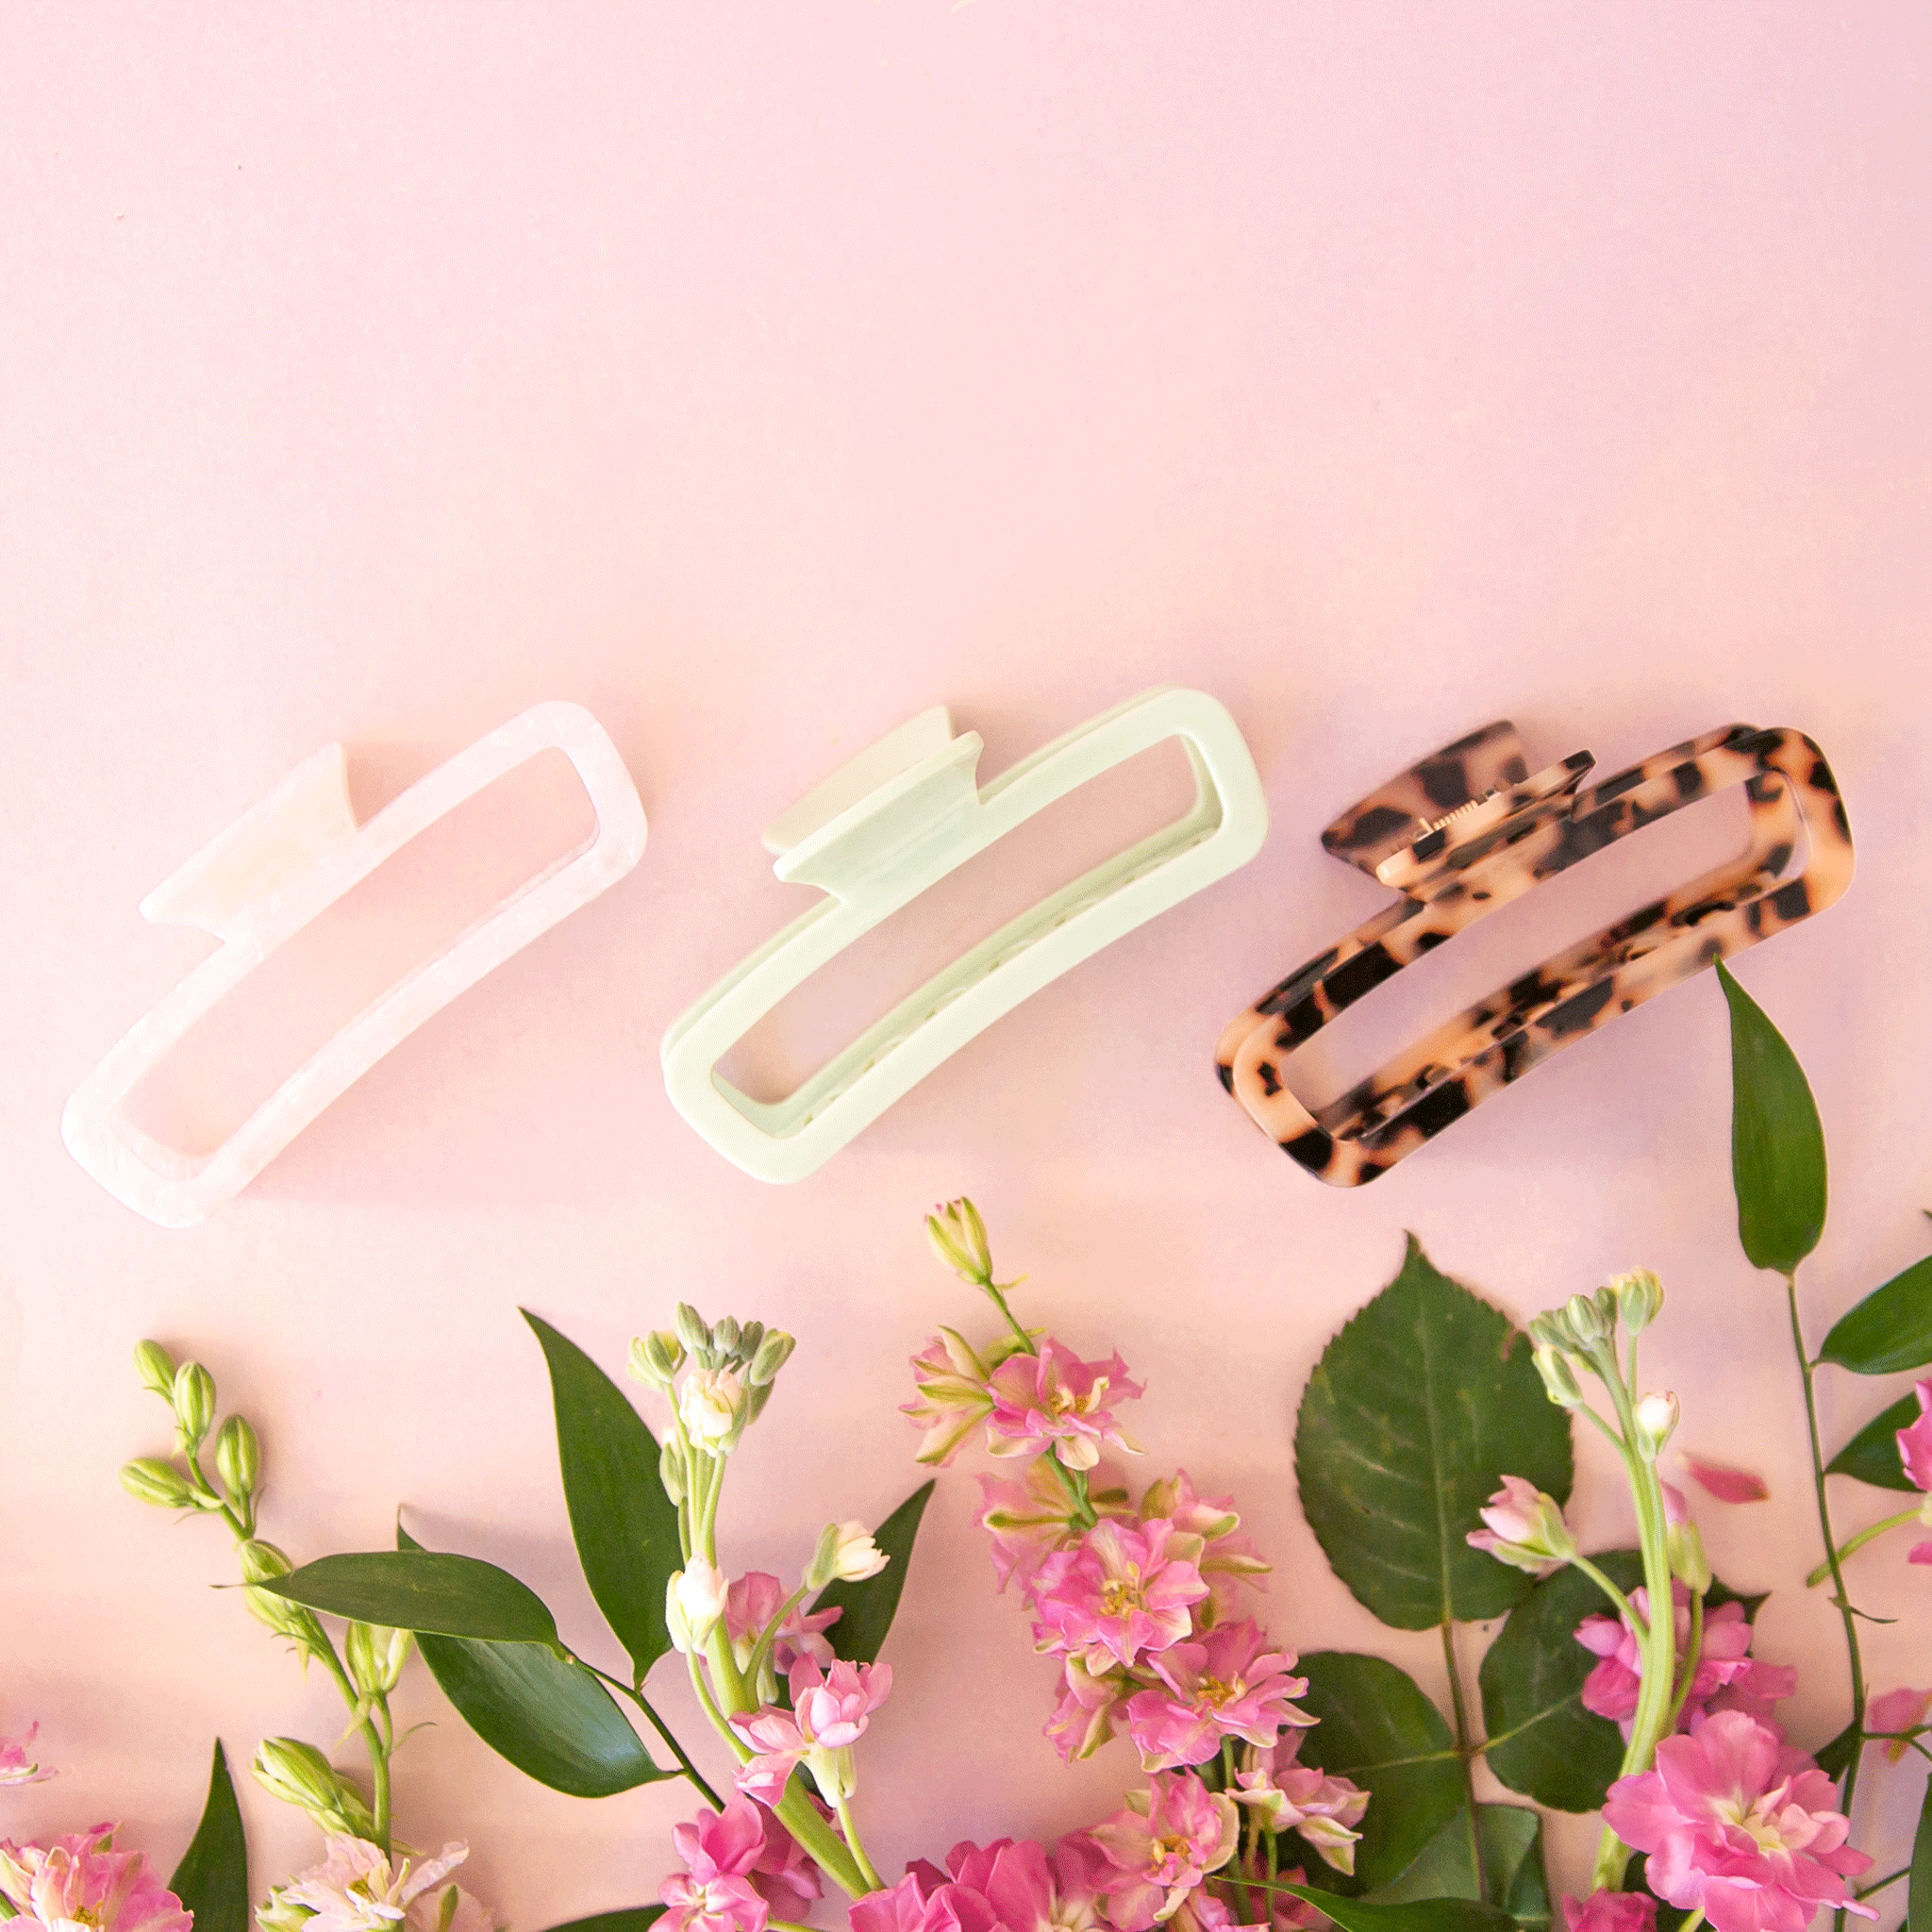 On a light pink background is three of the rectangle claw clips in a light tortoise shade, a pearly white and a light mint green. 